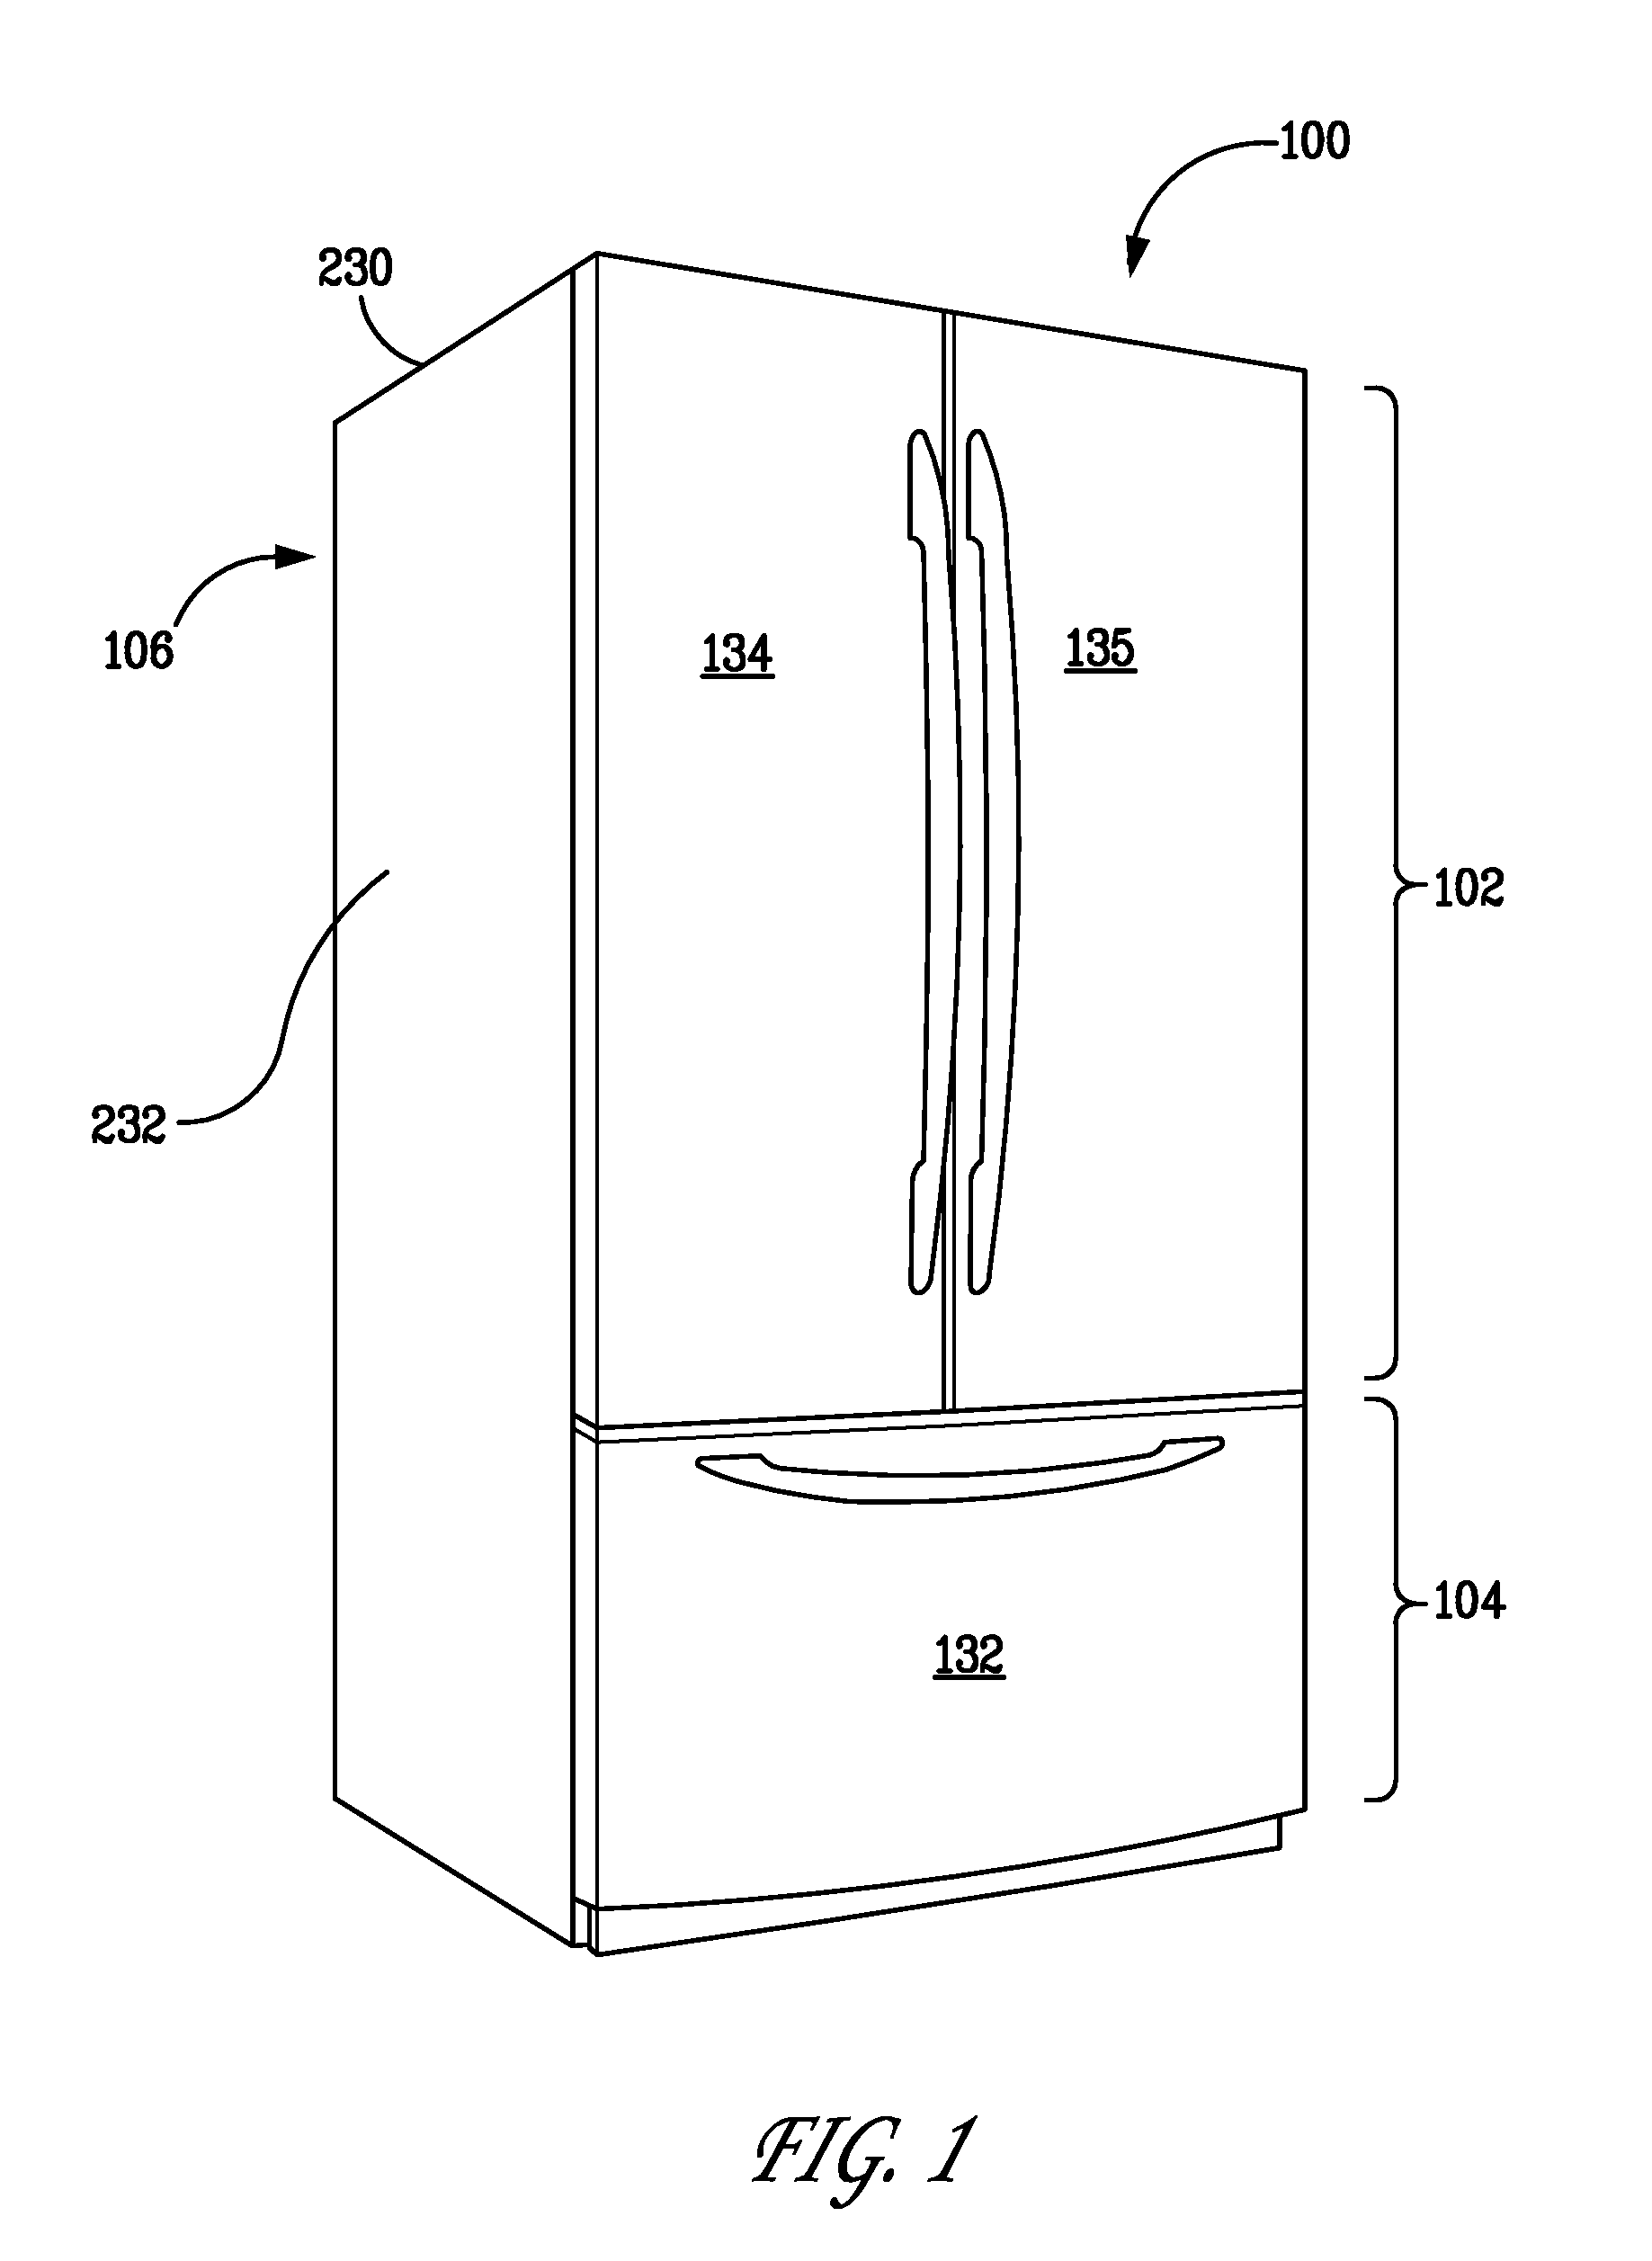 Temperature controlled compartment and method for a refrigerator